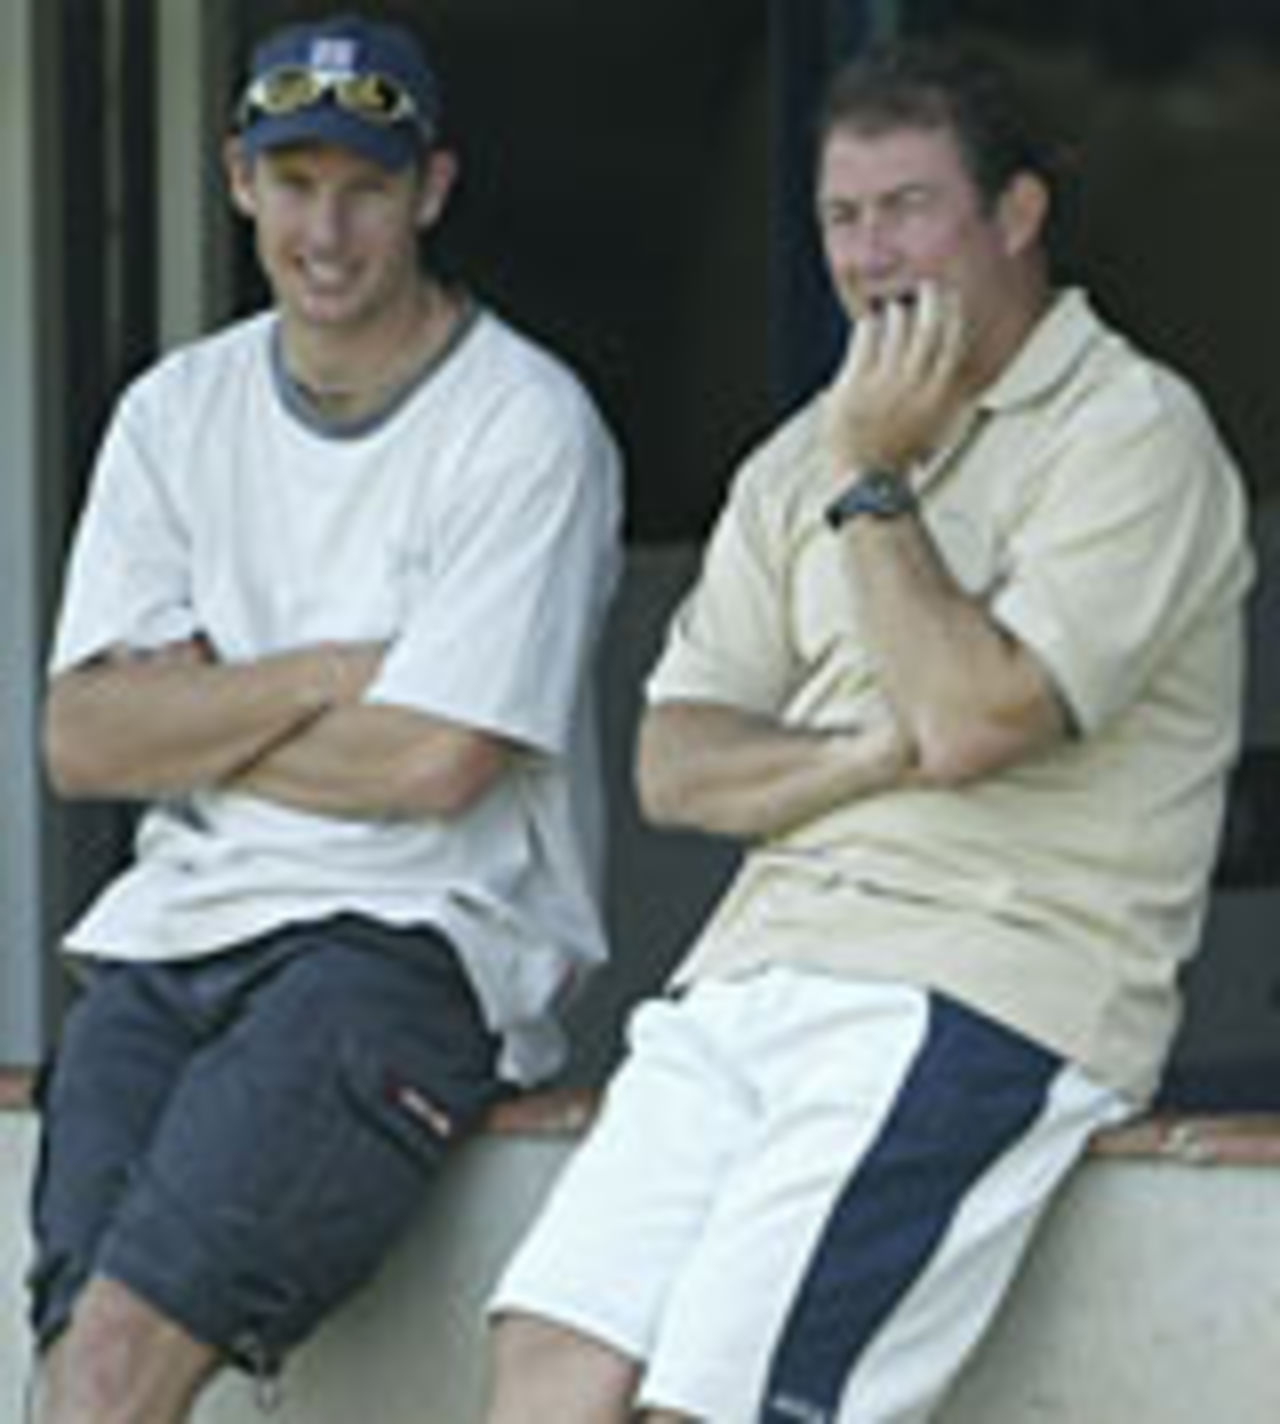 Andy Blignaut and Geoff Marsh chat in Harare, May 18, 2004